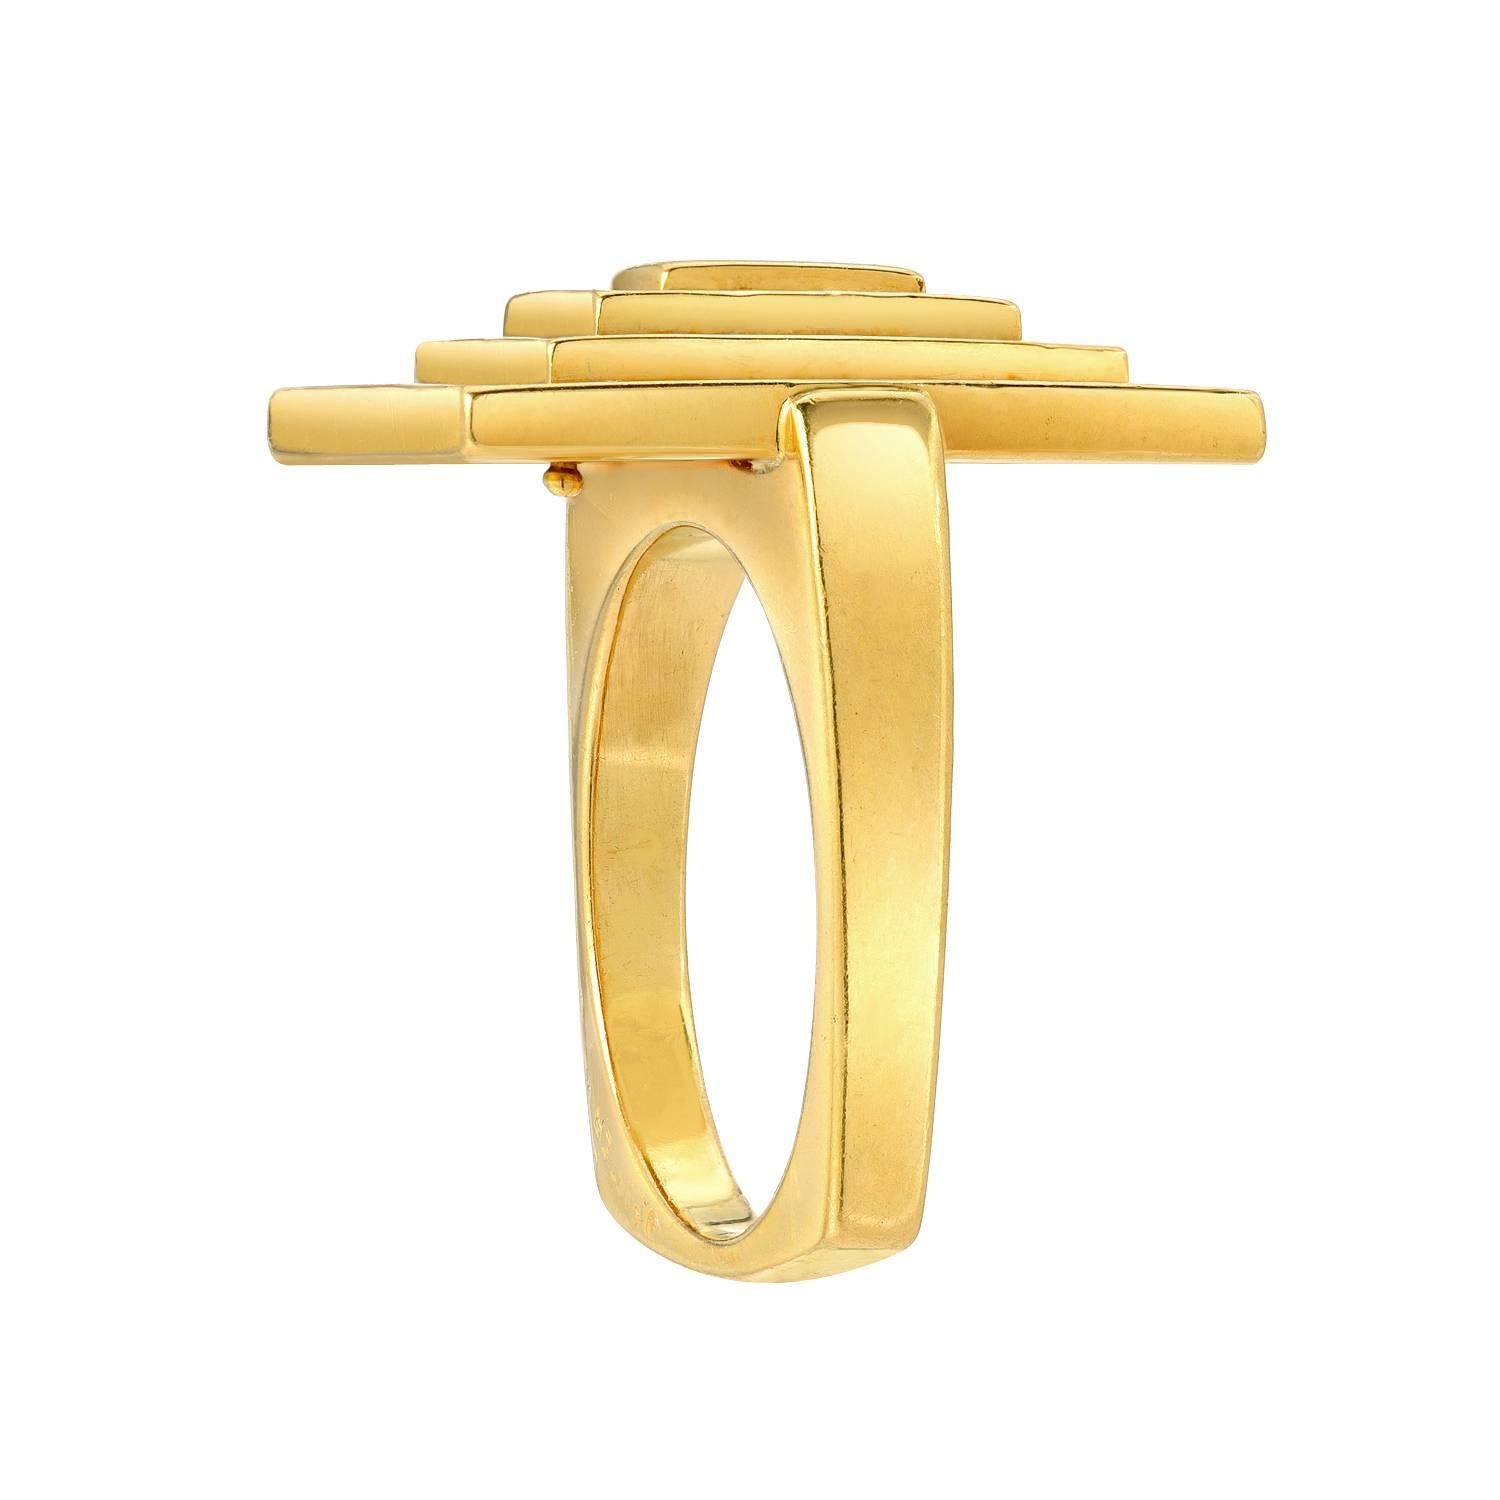 The top designed as a stepped rectangular plaque to the gold squared shank, size 5.75
